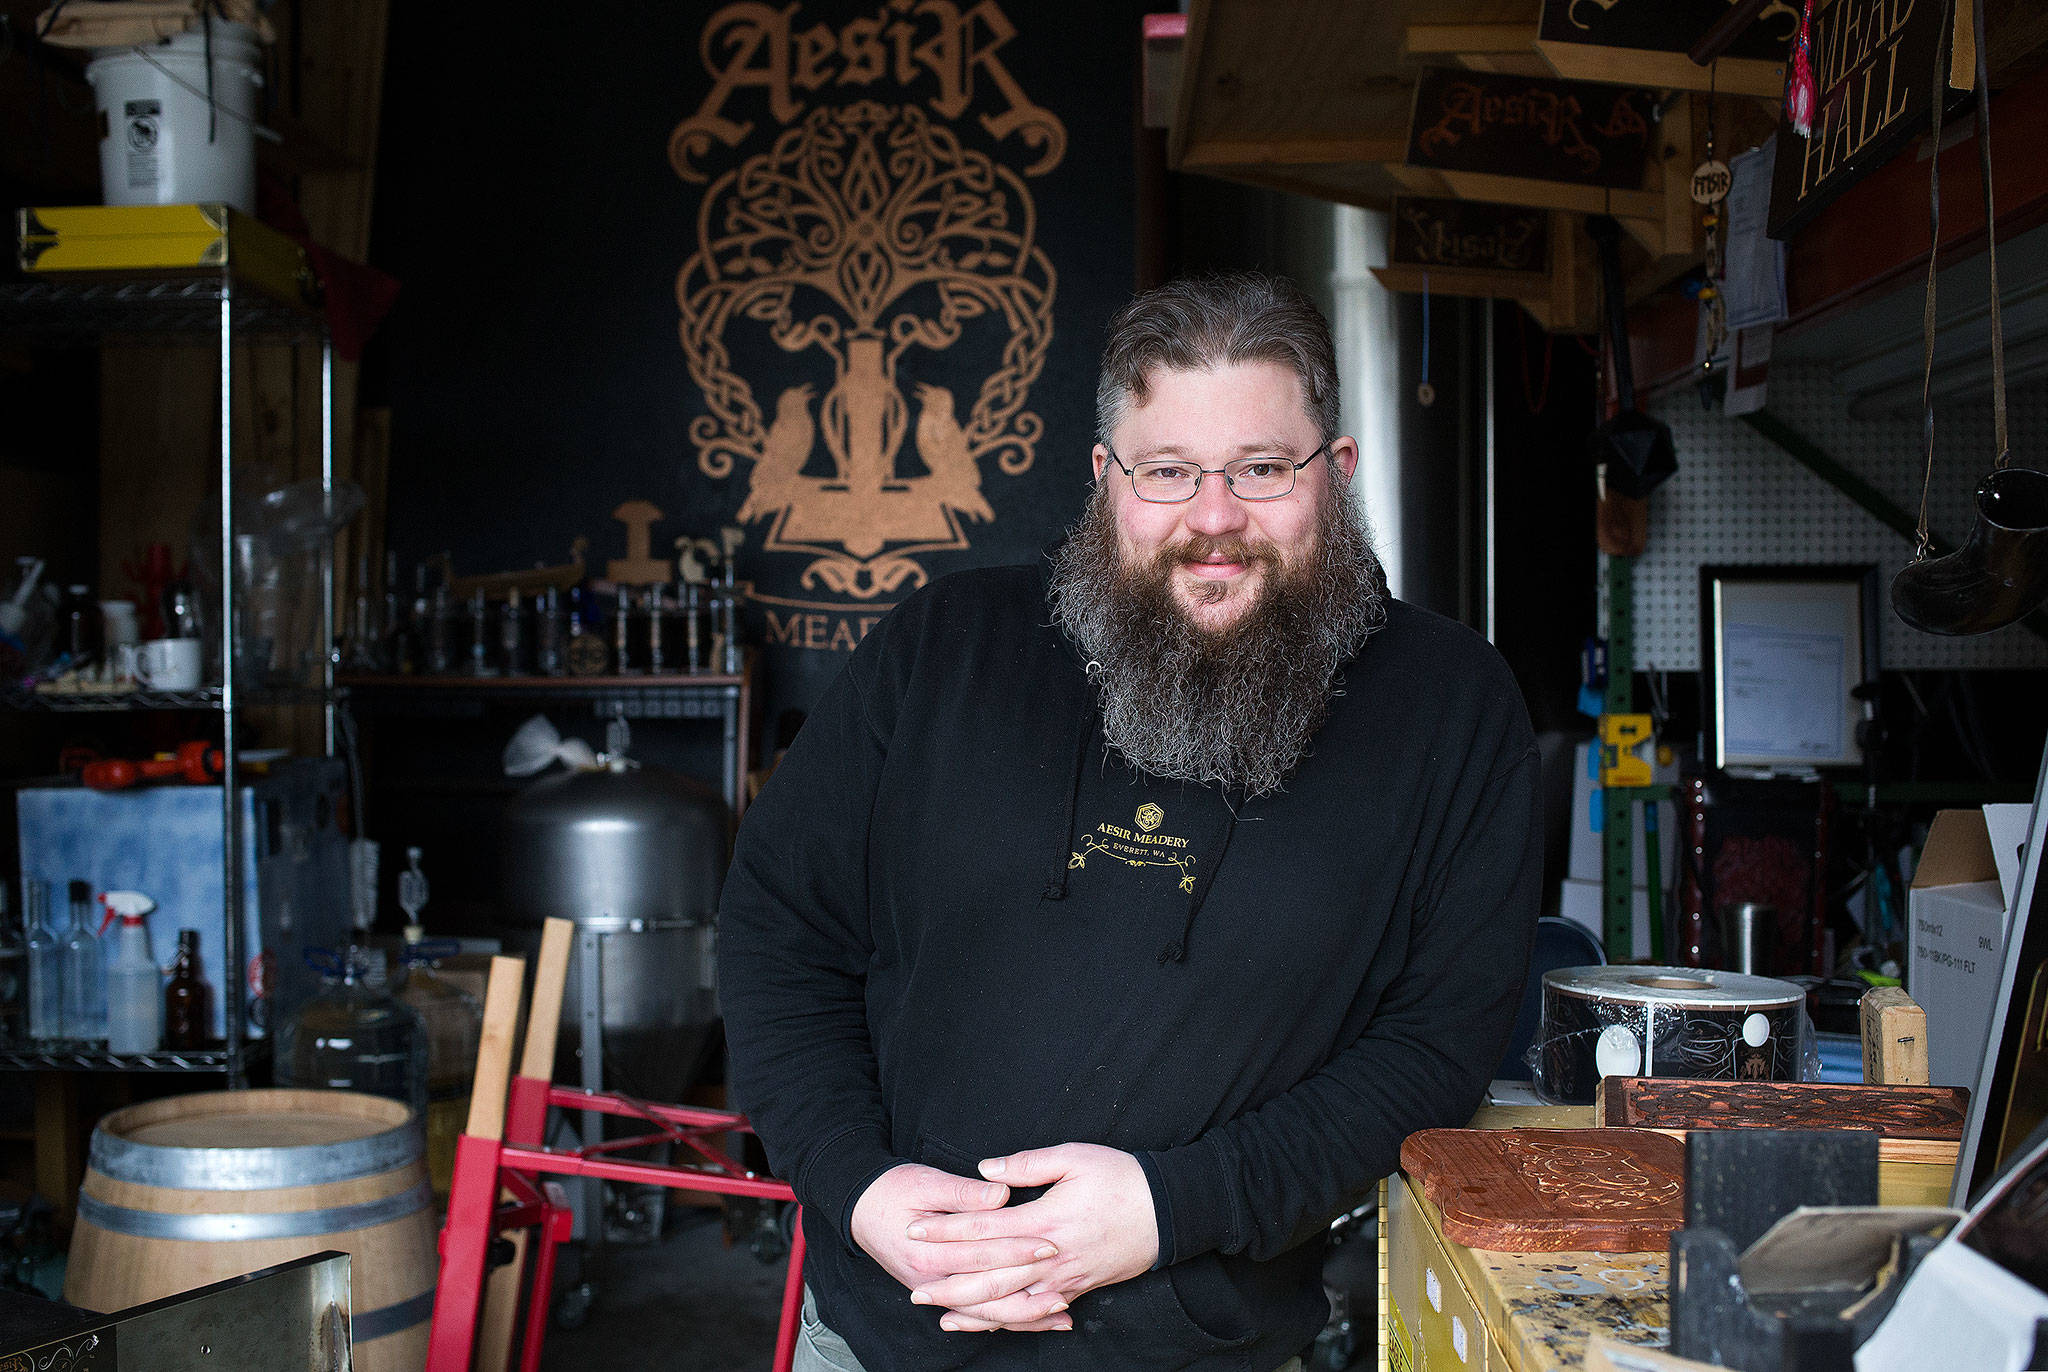 Erik Newquist, owner and brewer at Aesir Meadery, is making a name for himself in the mead brewing business in Everett. (Andy Bronson / The Herald)